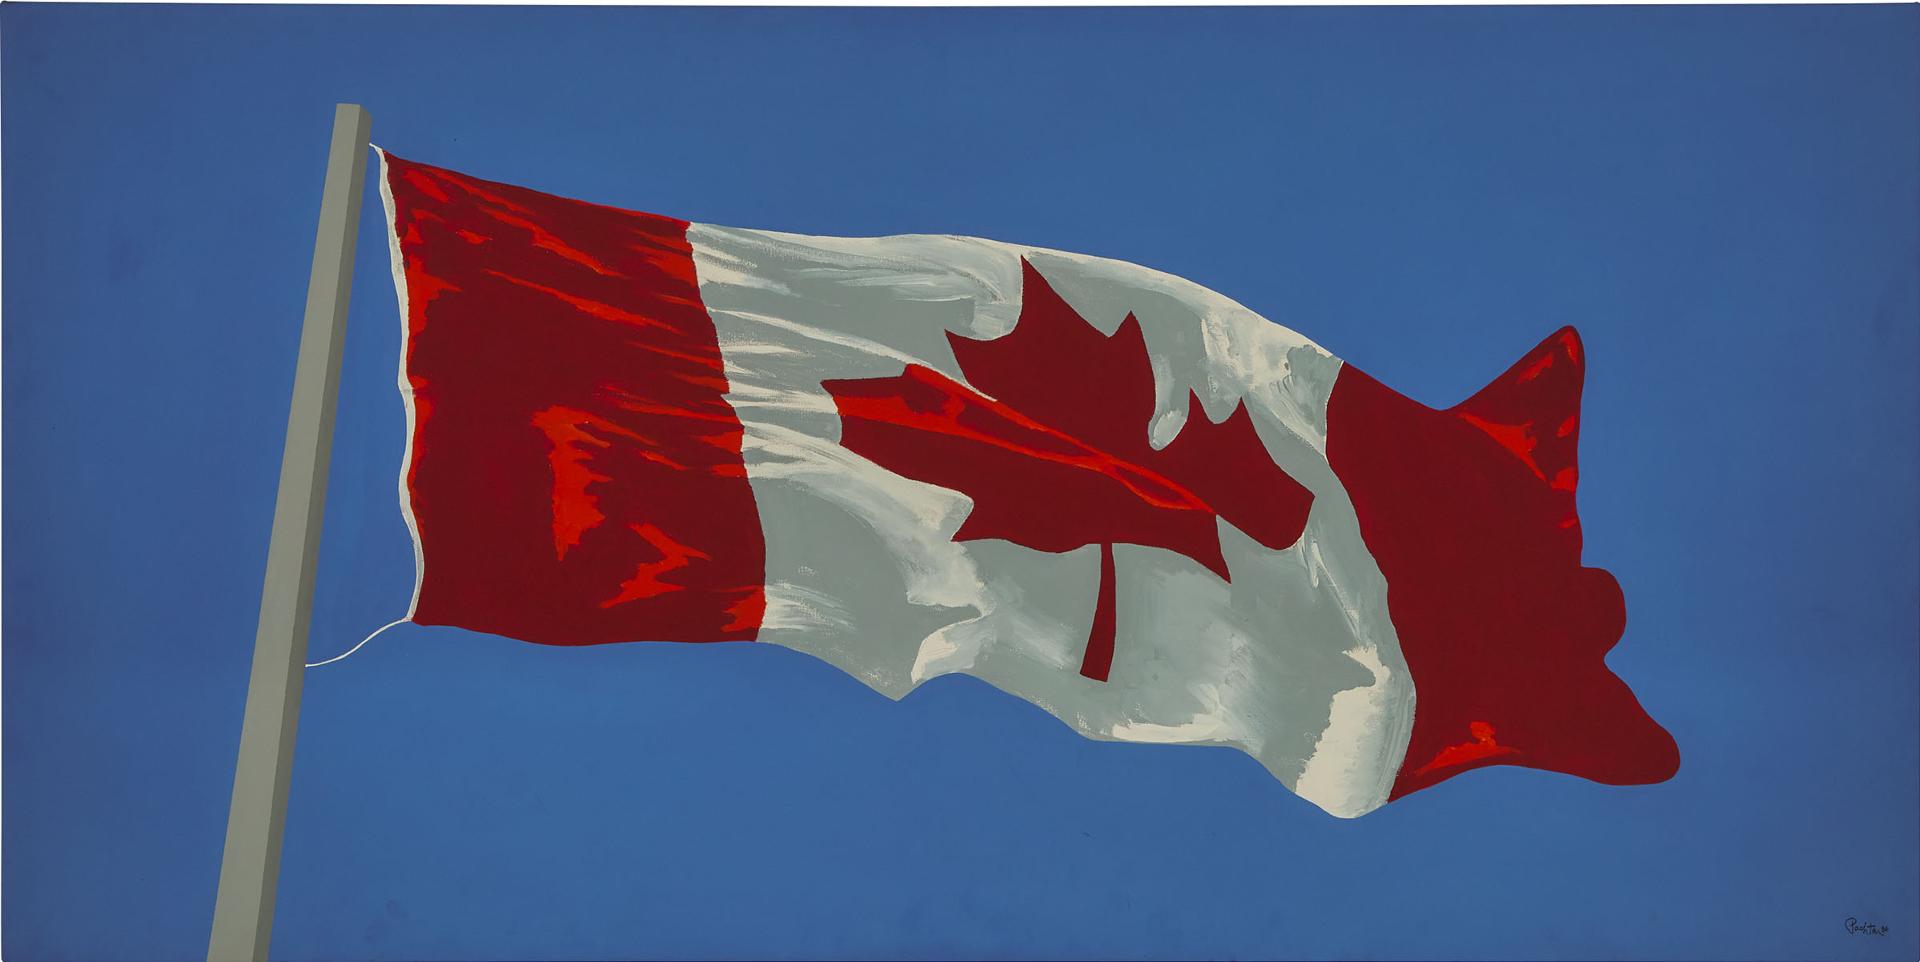 Charles Pachter (1942) - The Painted Flag, 1986